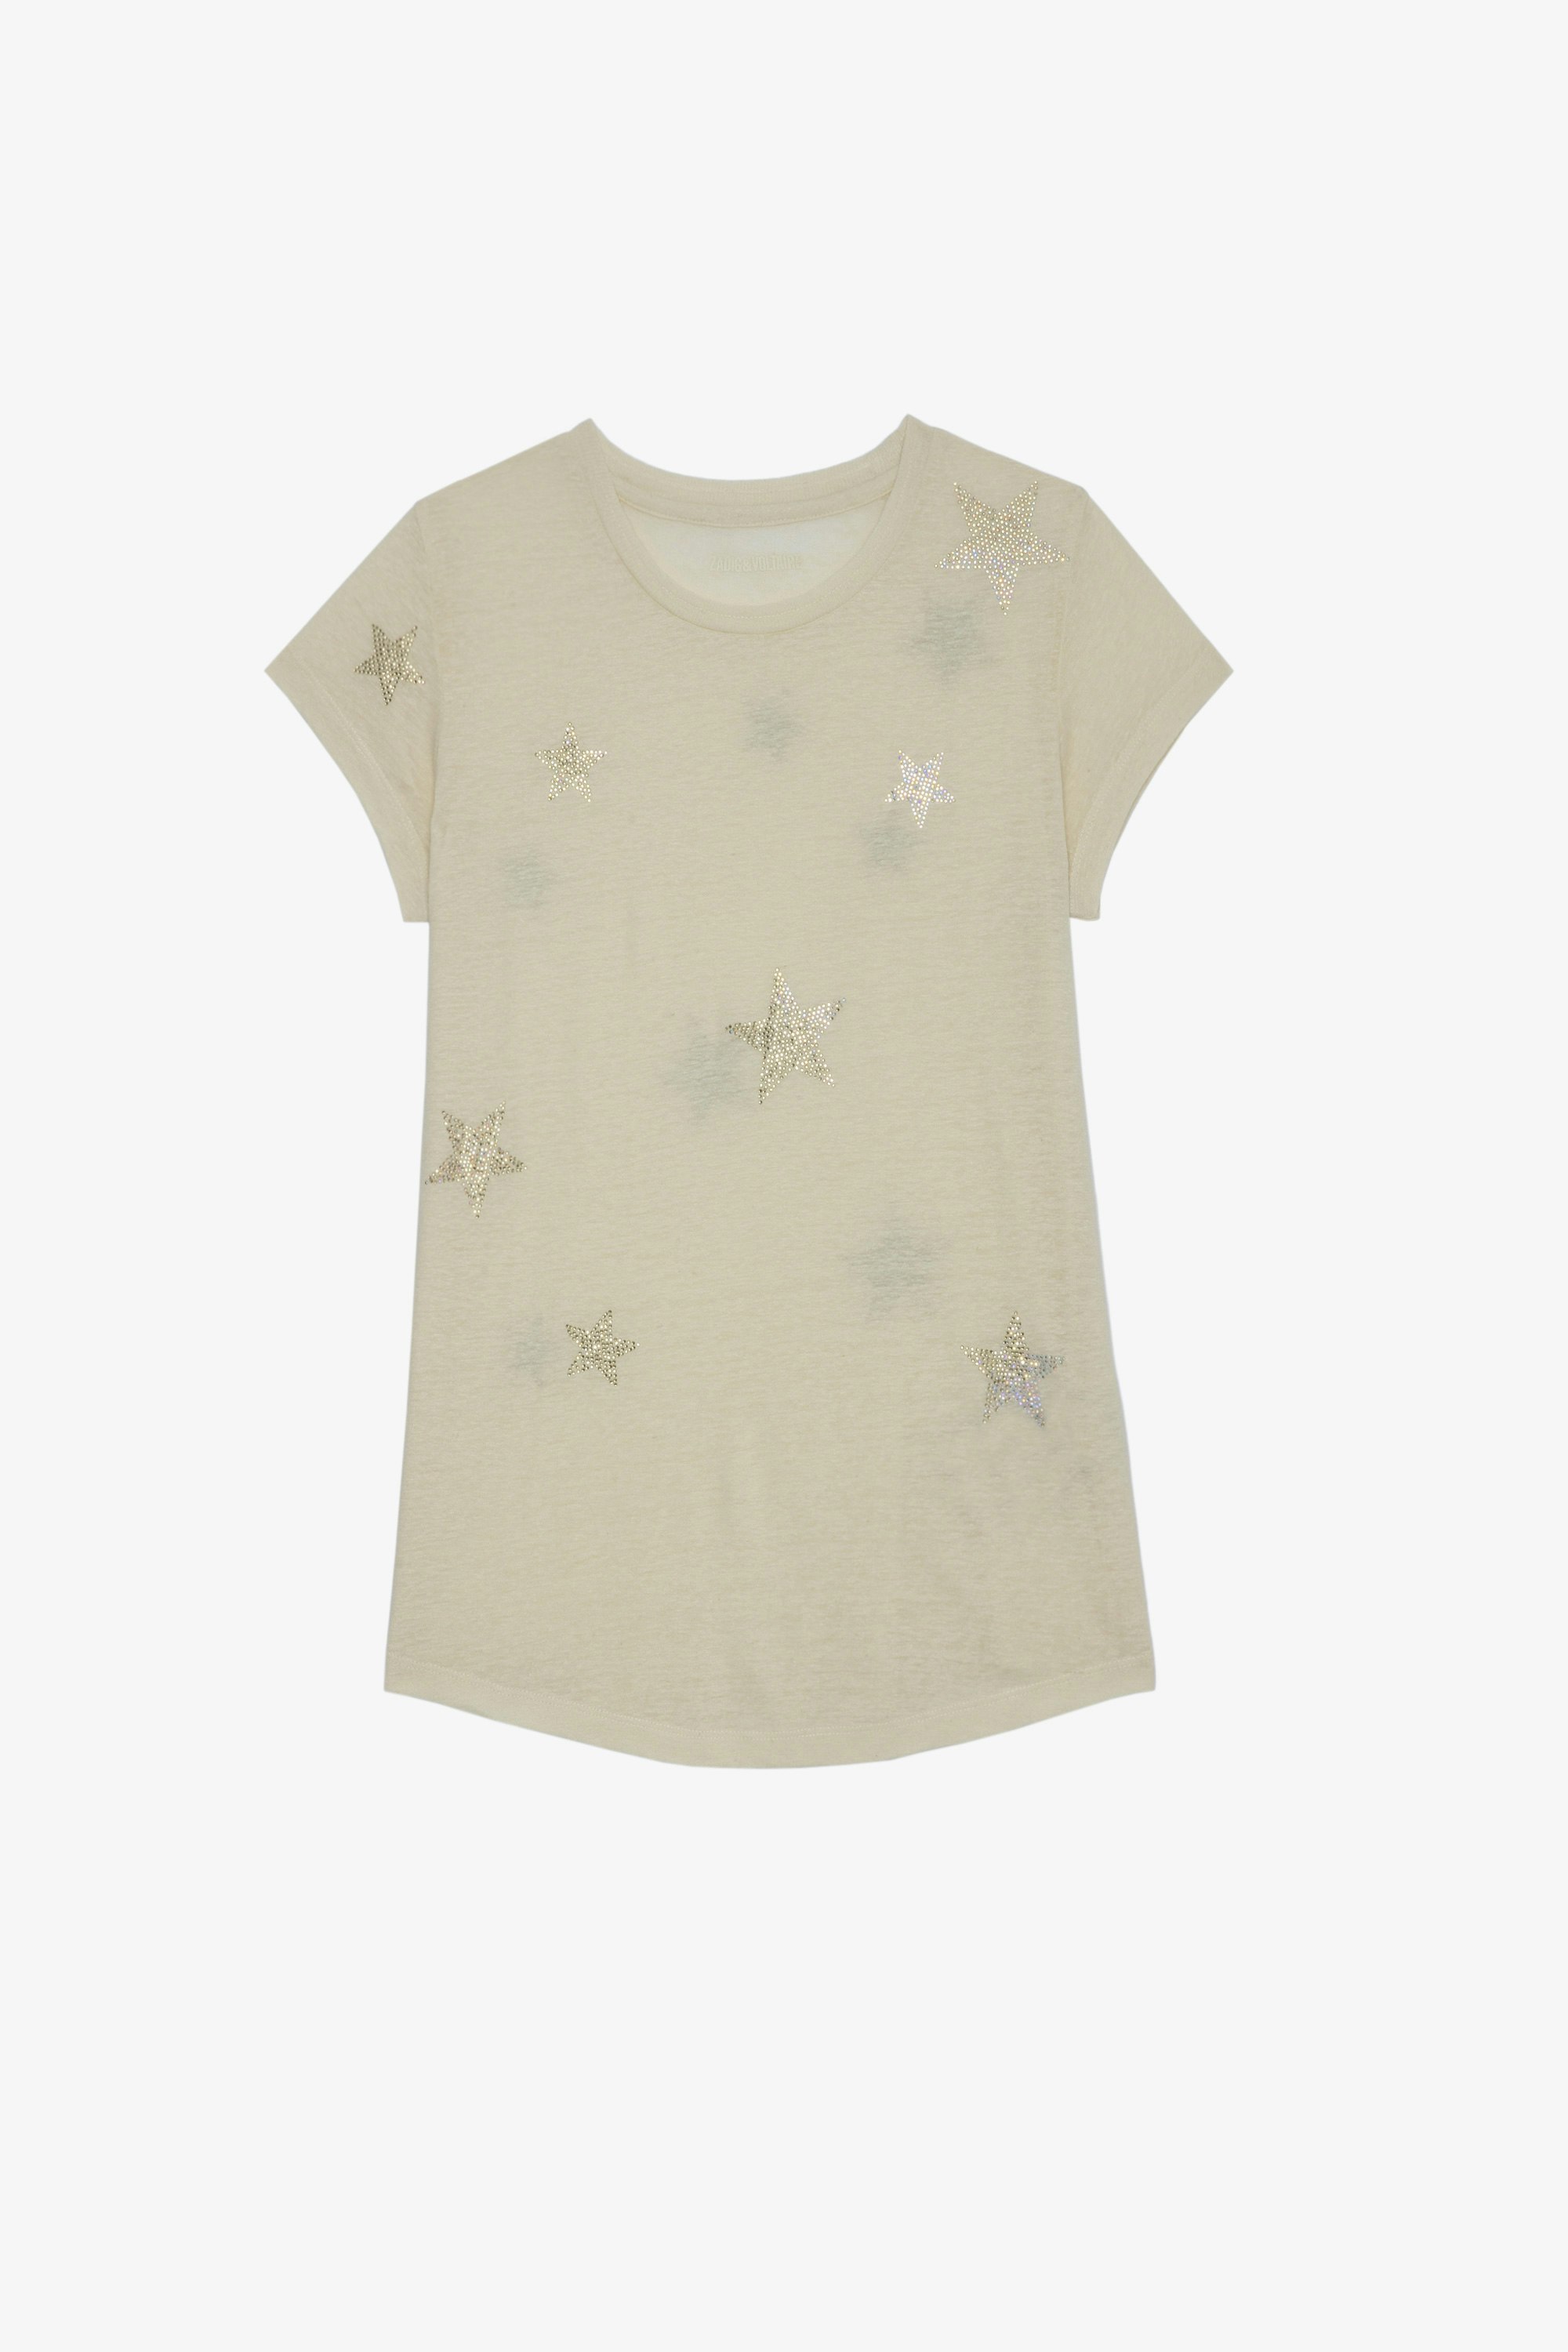 Skinny Stars Diamanté T-Shirt Women’s beige cotton T-shirt with short sleeves and ZV wings motif on the back